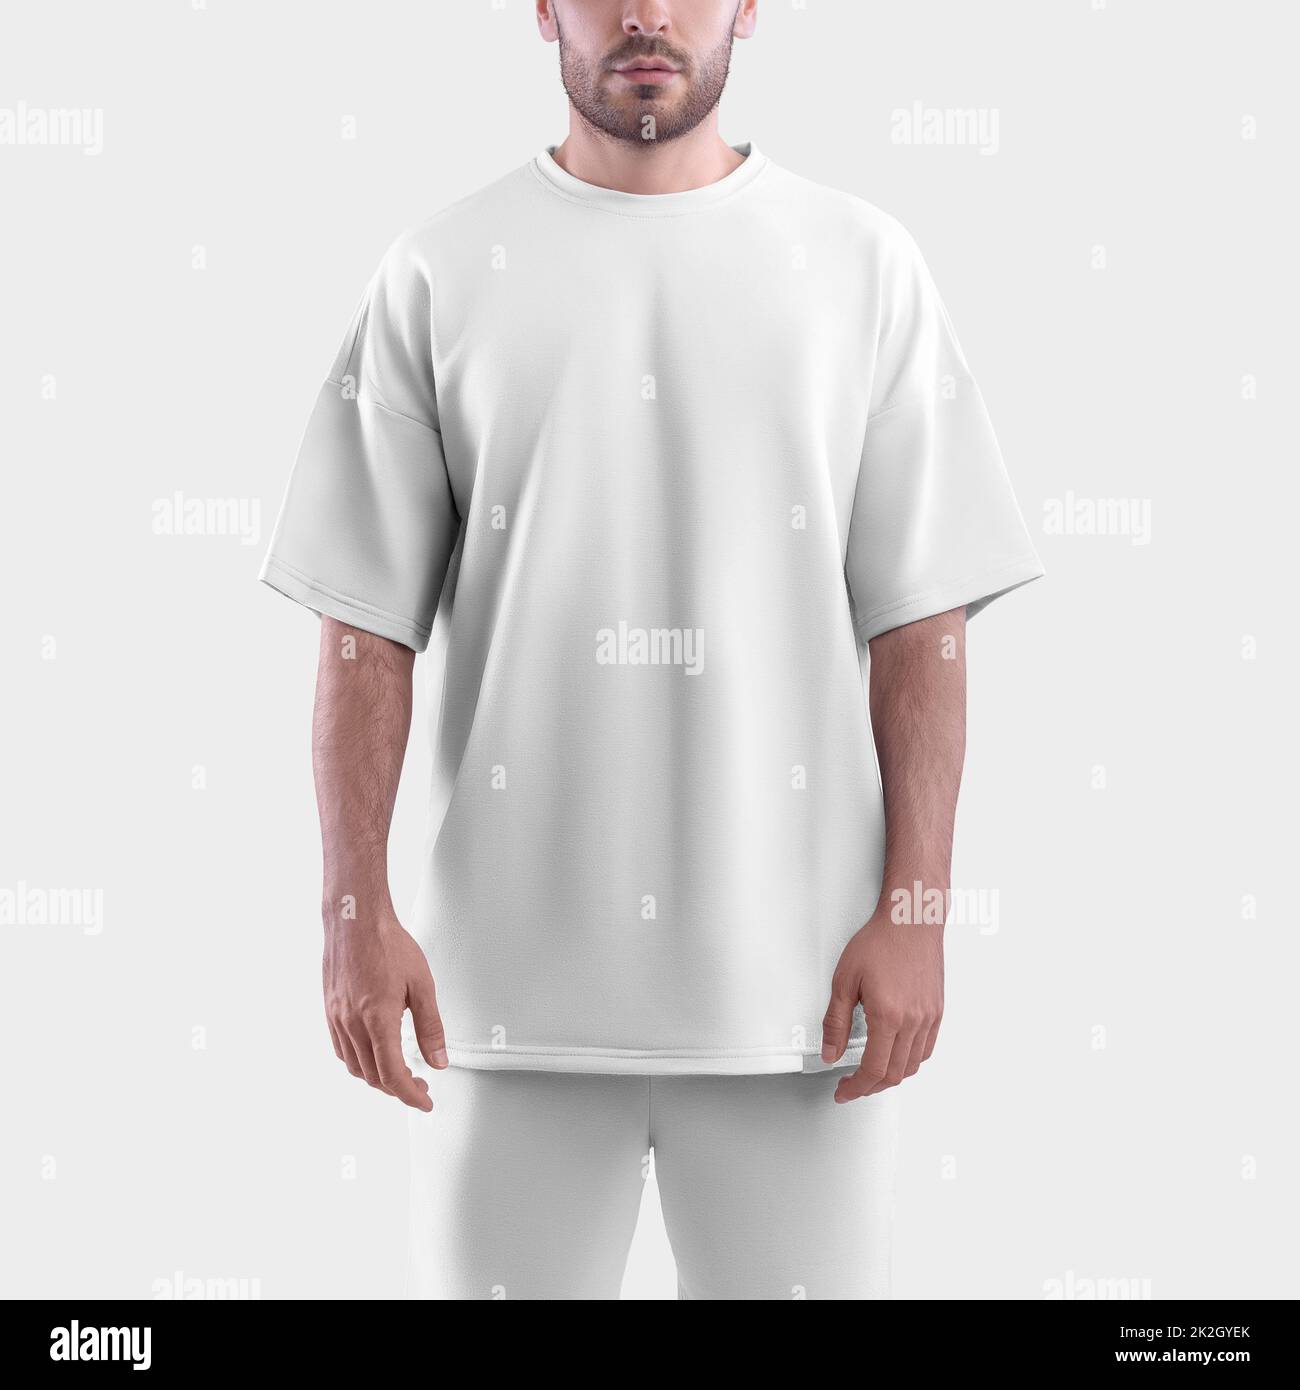 Mockup of a white oversize t-shirt on a man. Clothes template isolated on white background. Stock Photo